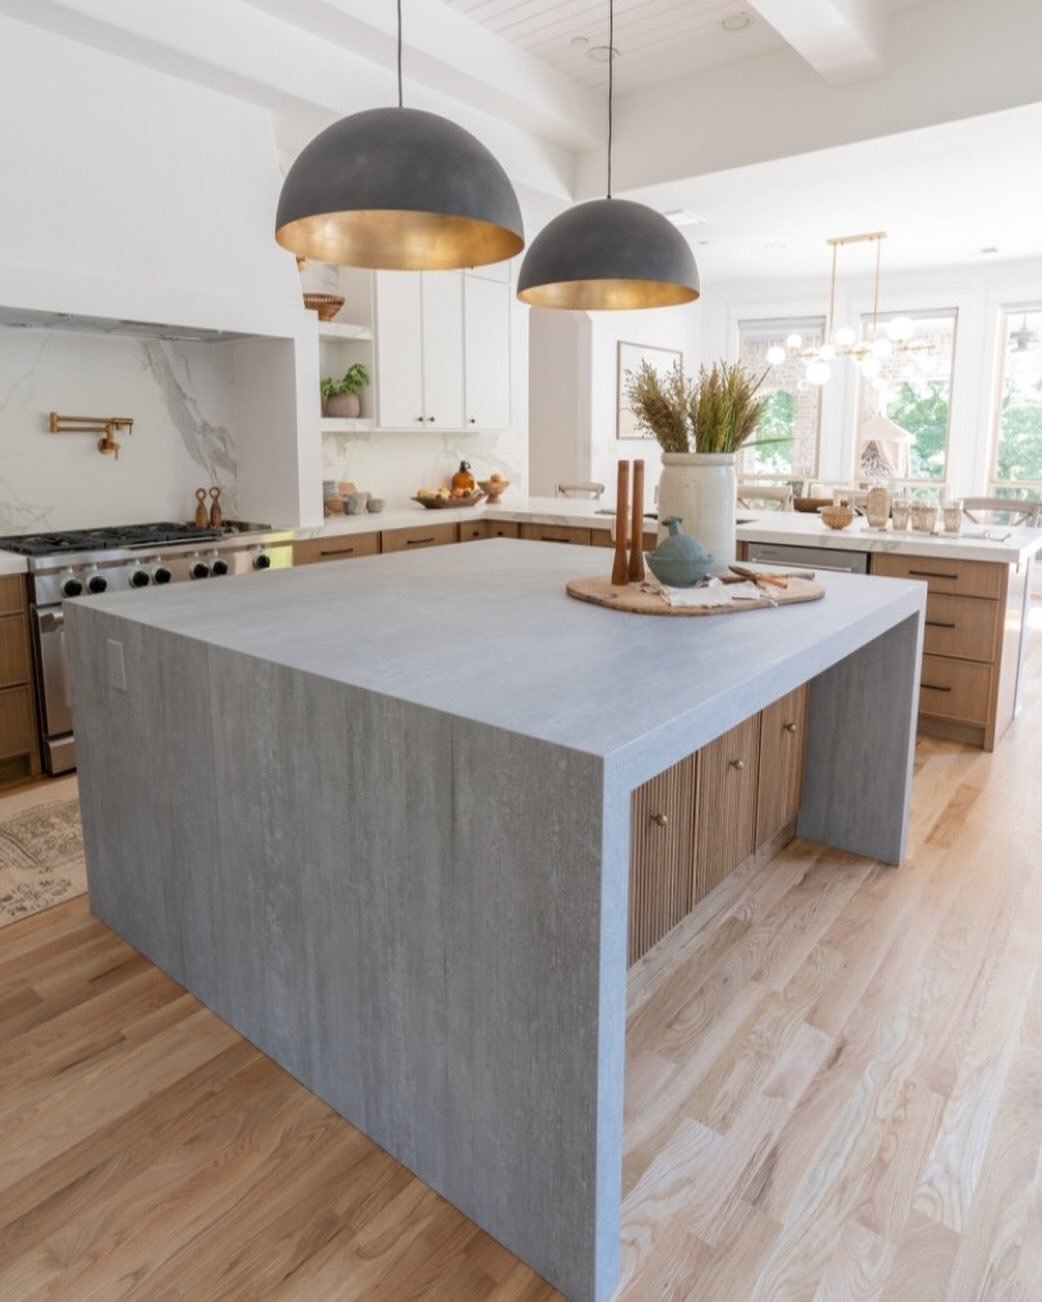 Fun news, we were featured by The Spruce in a recent article! We shared our favorite tips on how to refresh your kitchen countertops with simple changes that make a big difference and give your space a whole new look. Head to stories to discover how 